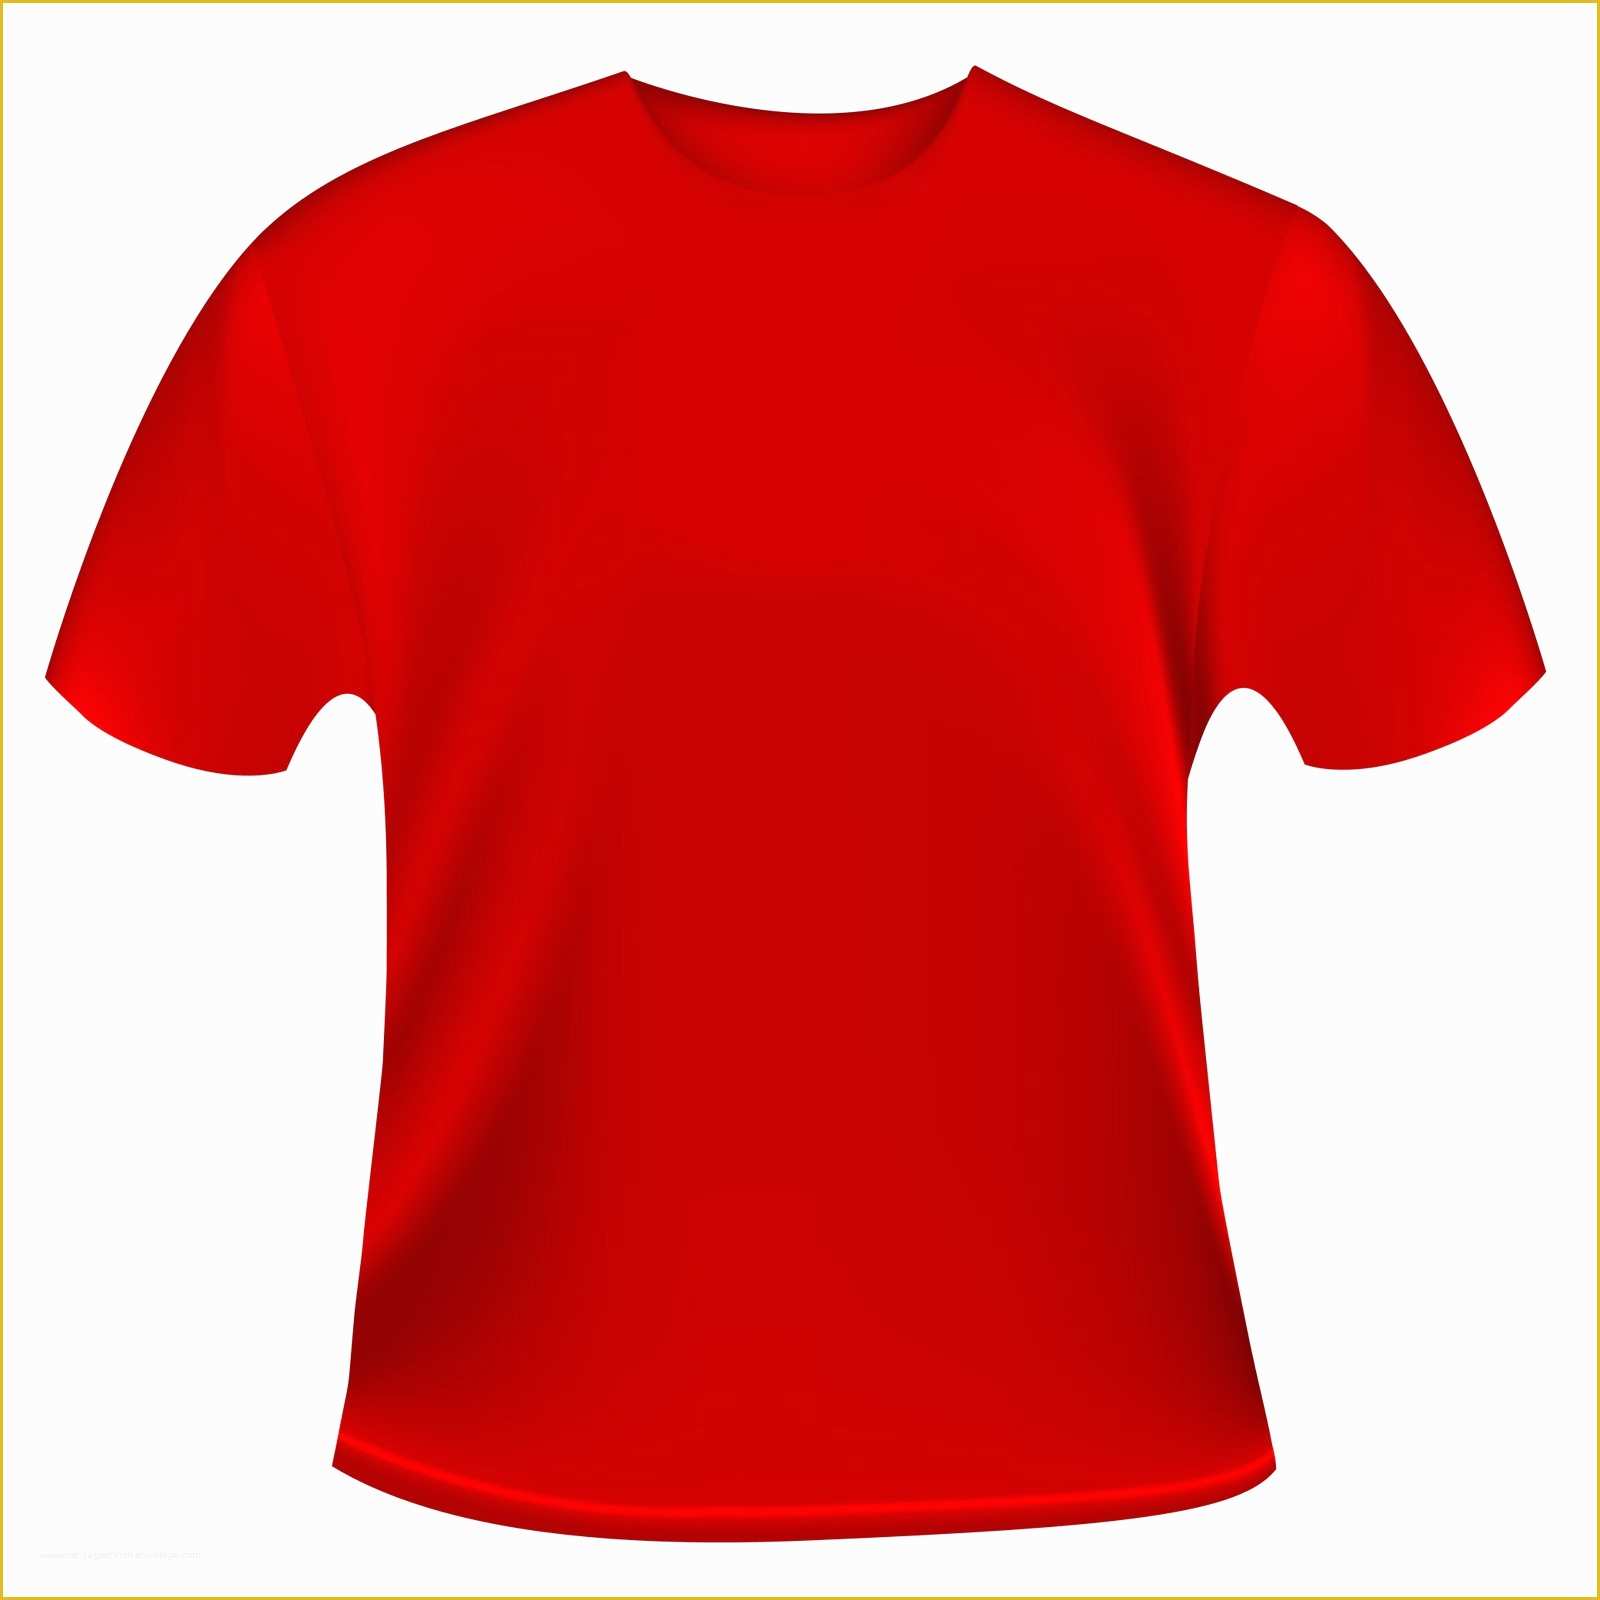 free-shirt-templates-of-red-shirt-clipart-clipart-suggest